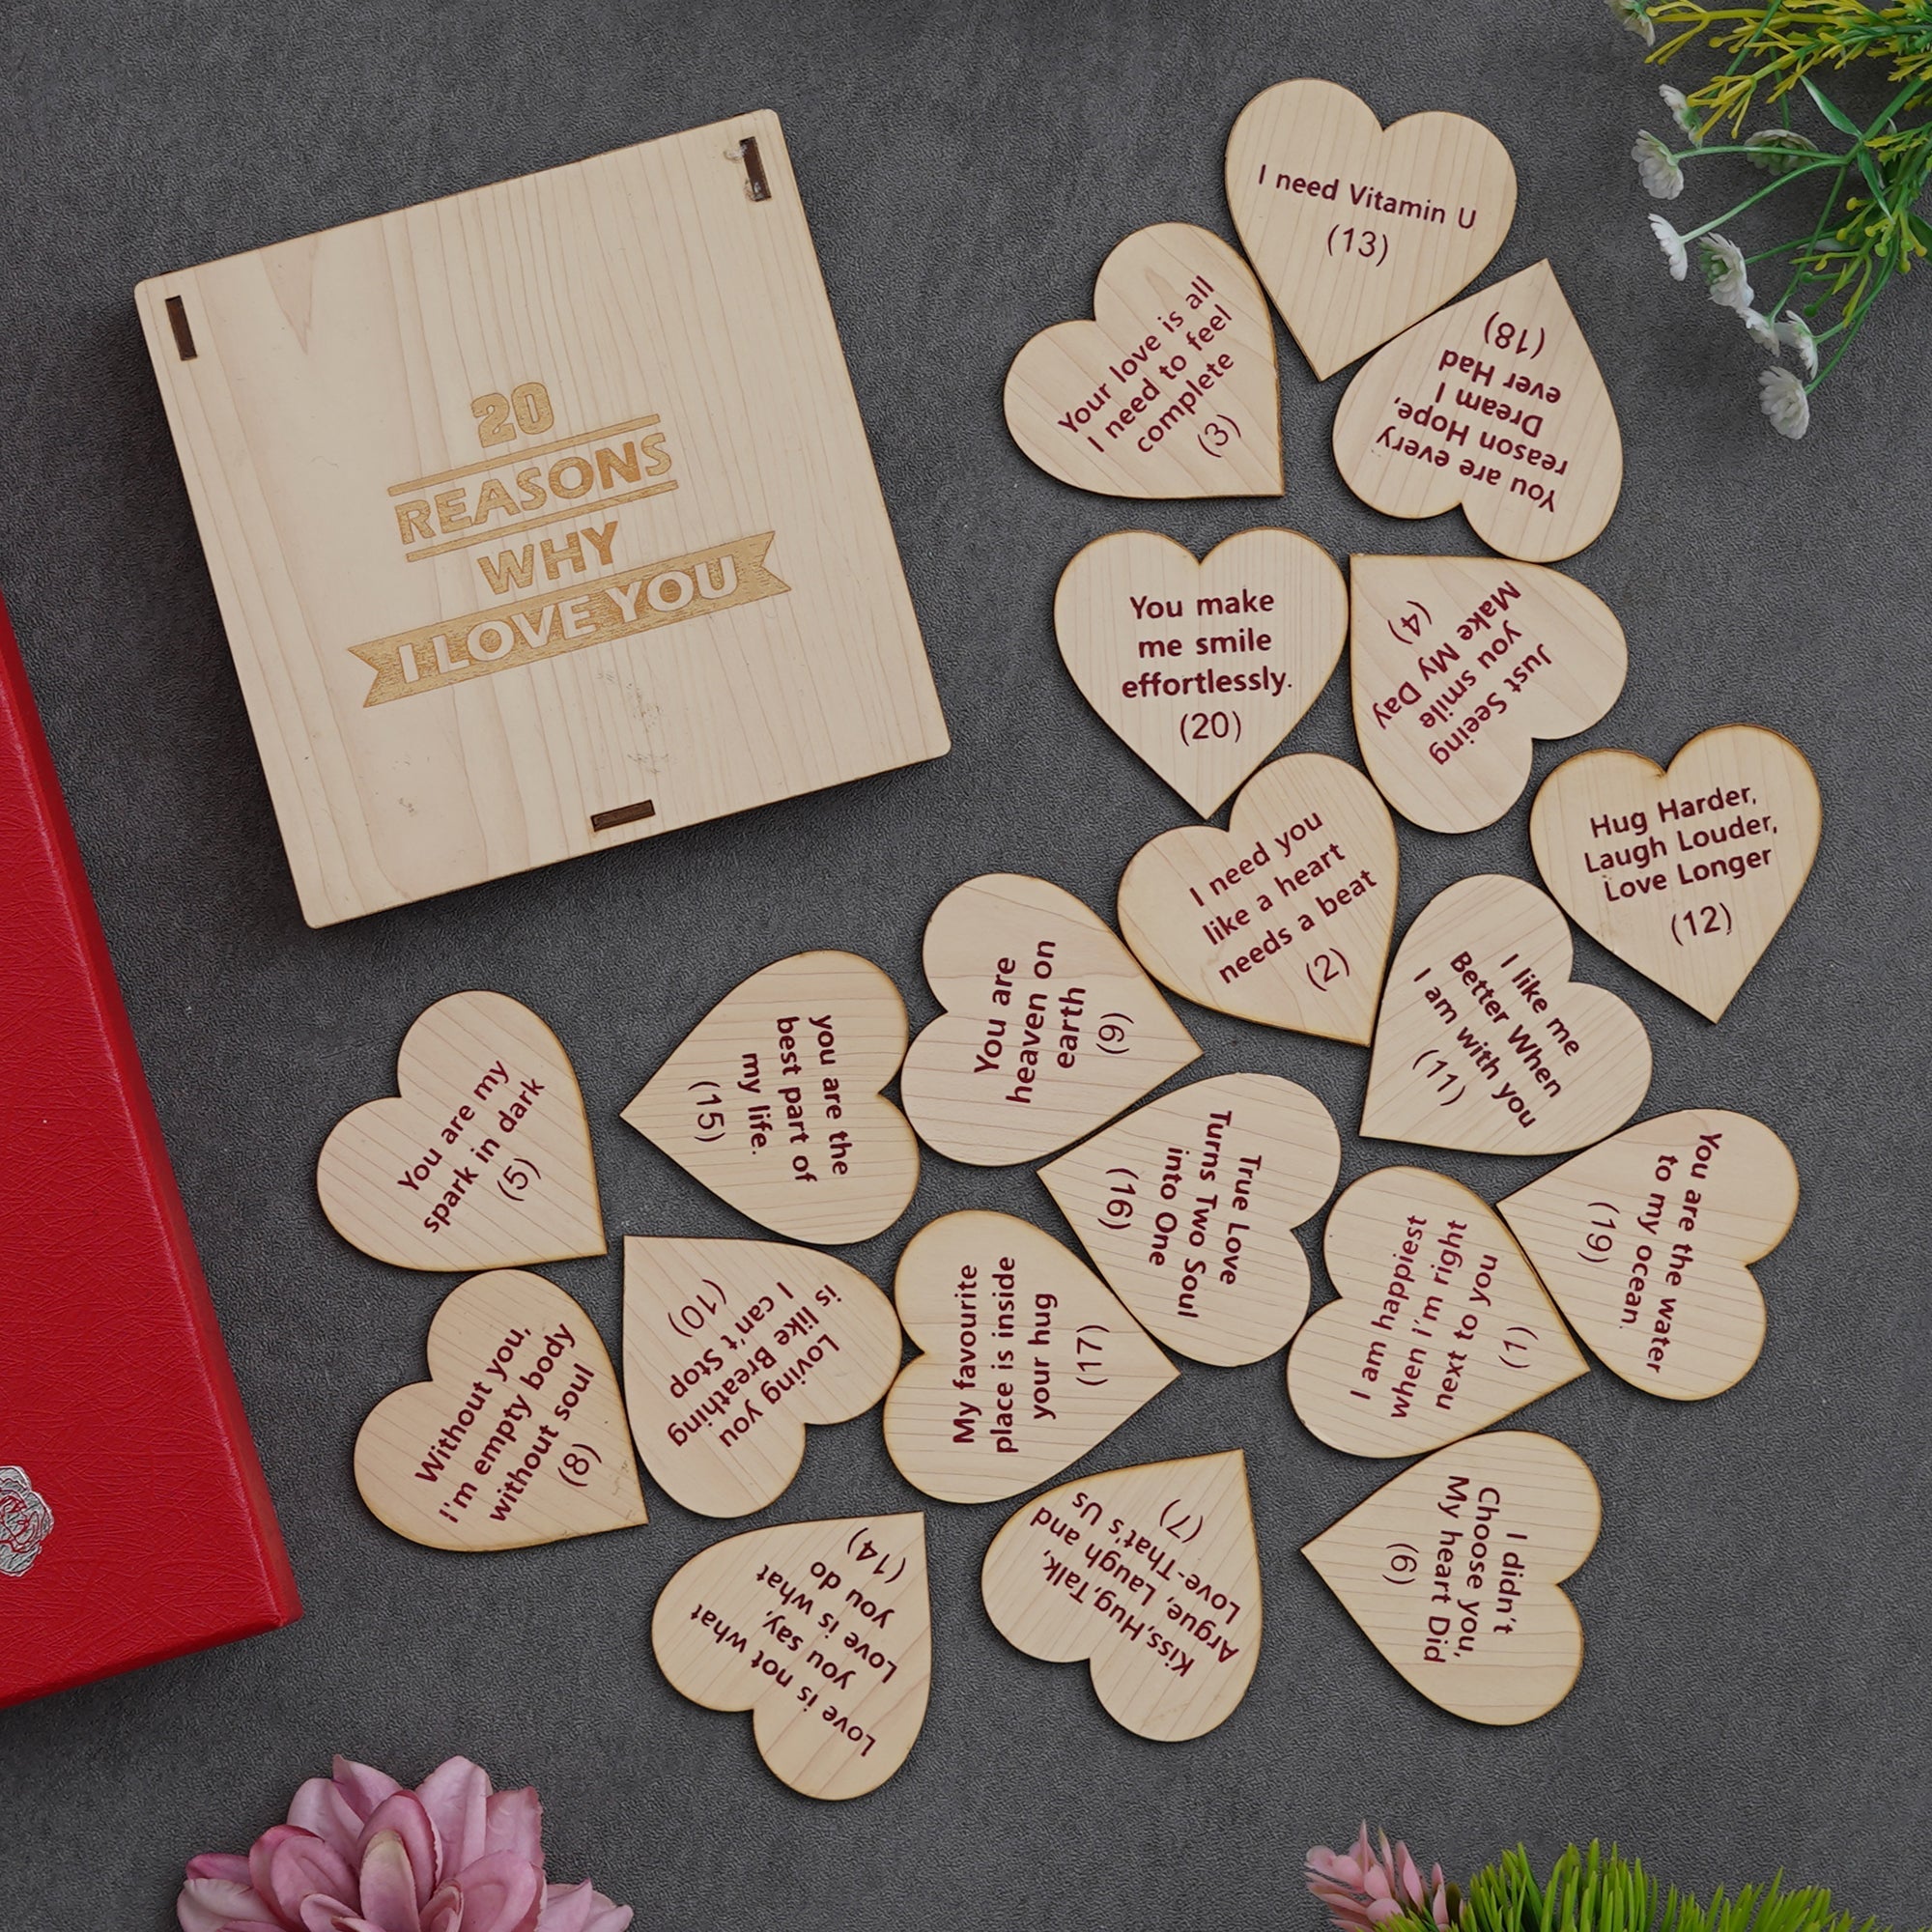 "20 Reasons Why I ❤️ You" or "20 Reasons Why I Need You" Printed on Little Hearts Valentine Brown Wooden Gift Set